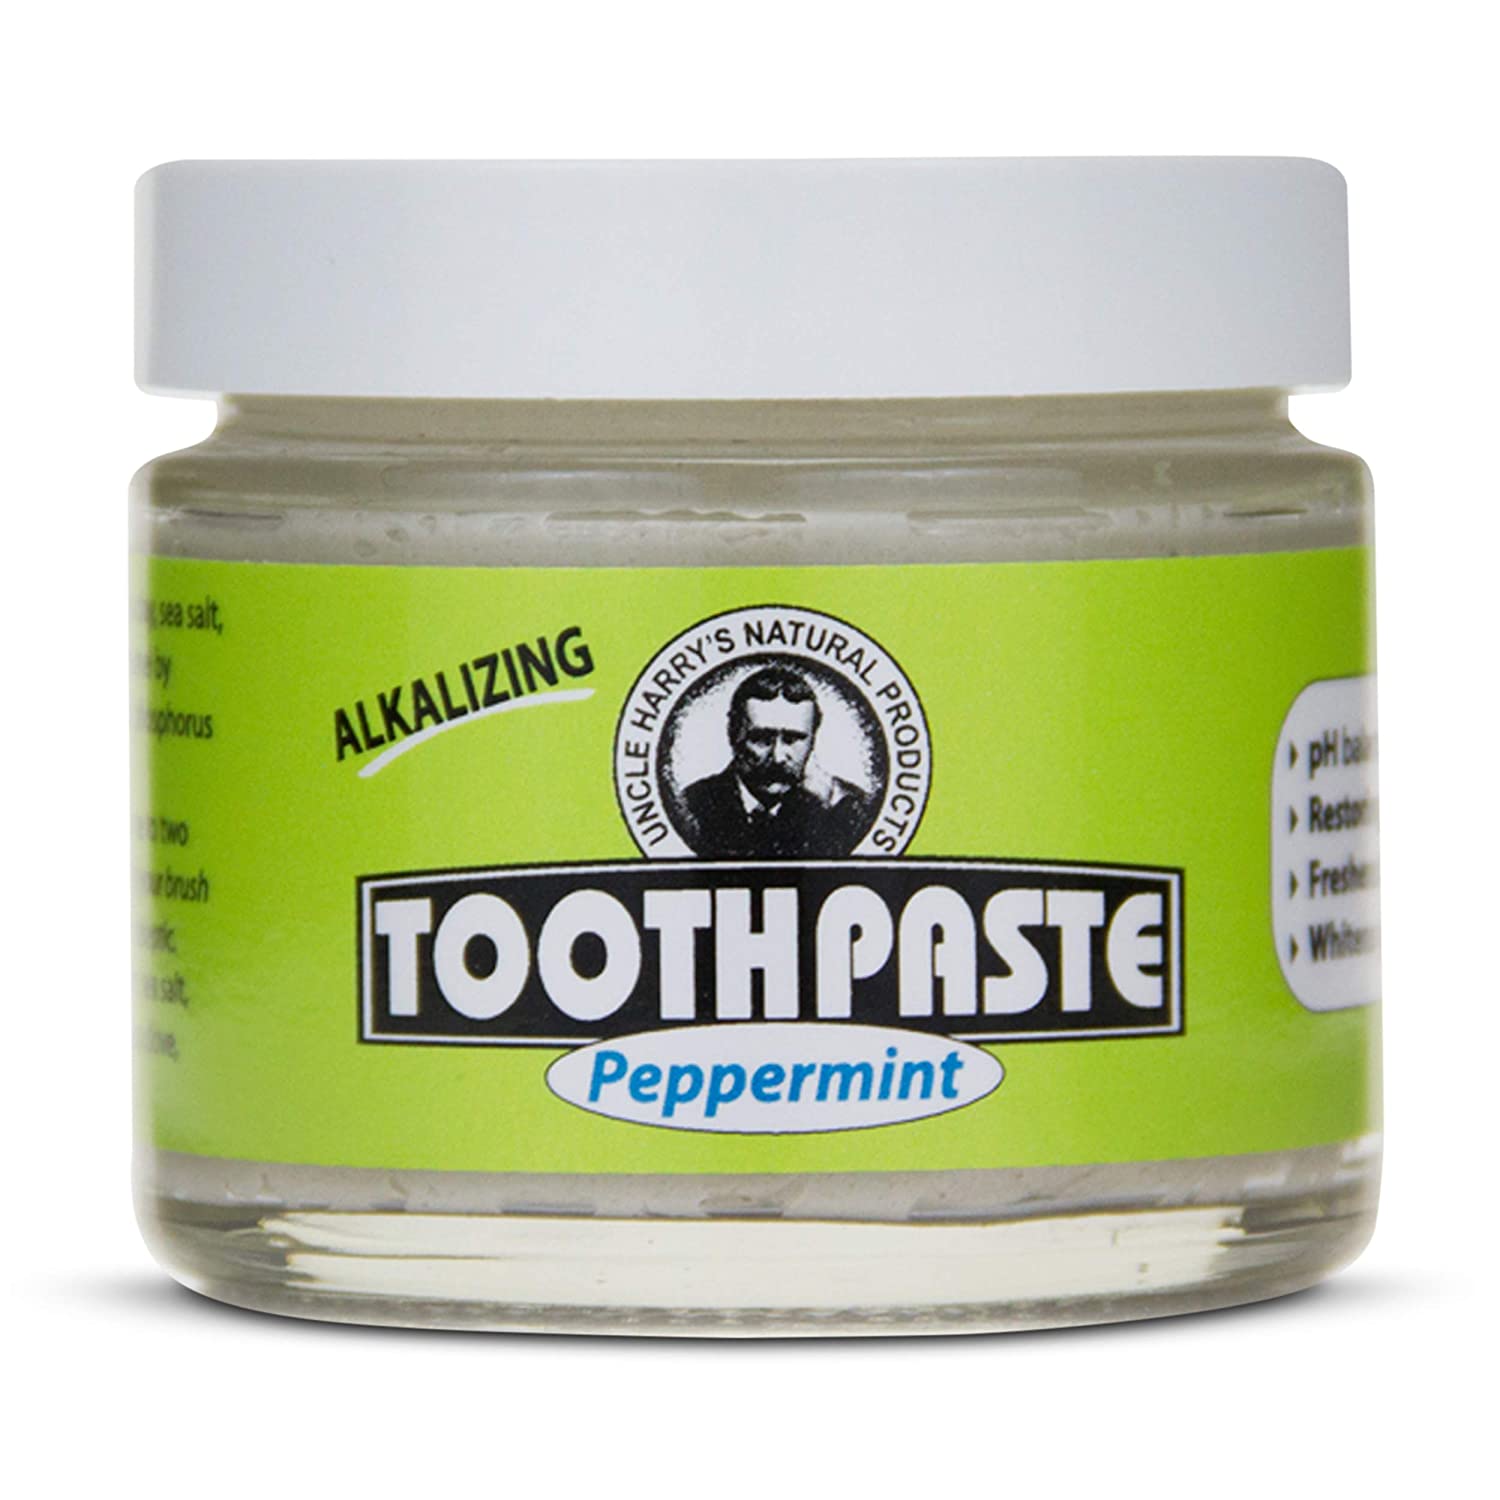 product view of uncle harry's remineralizing toothpaste